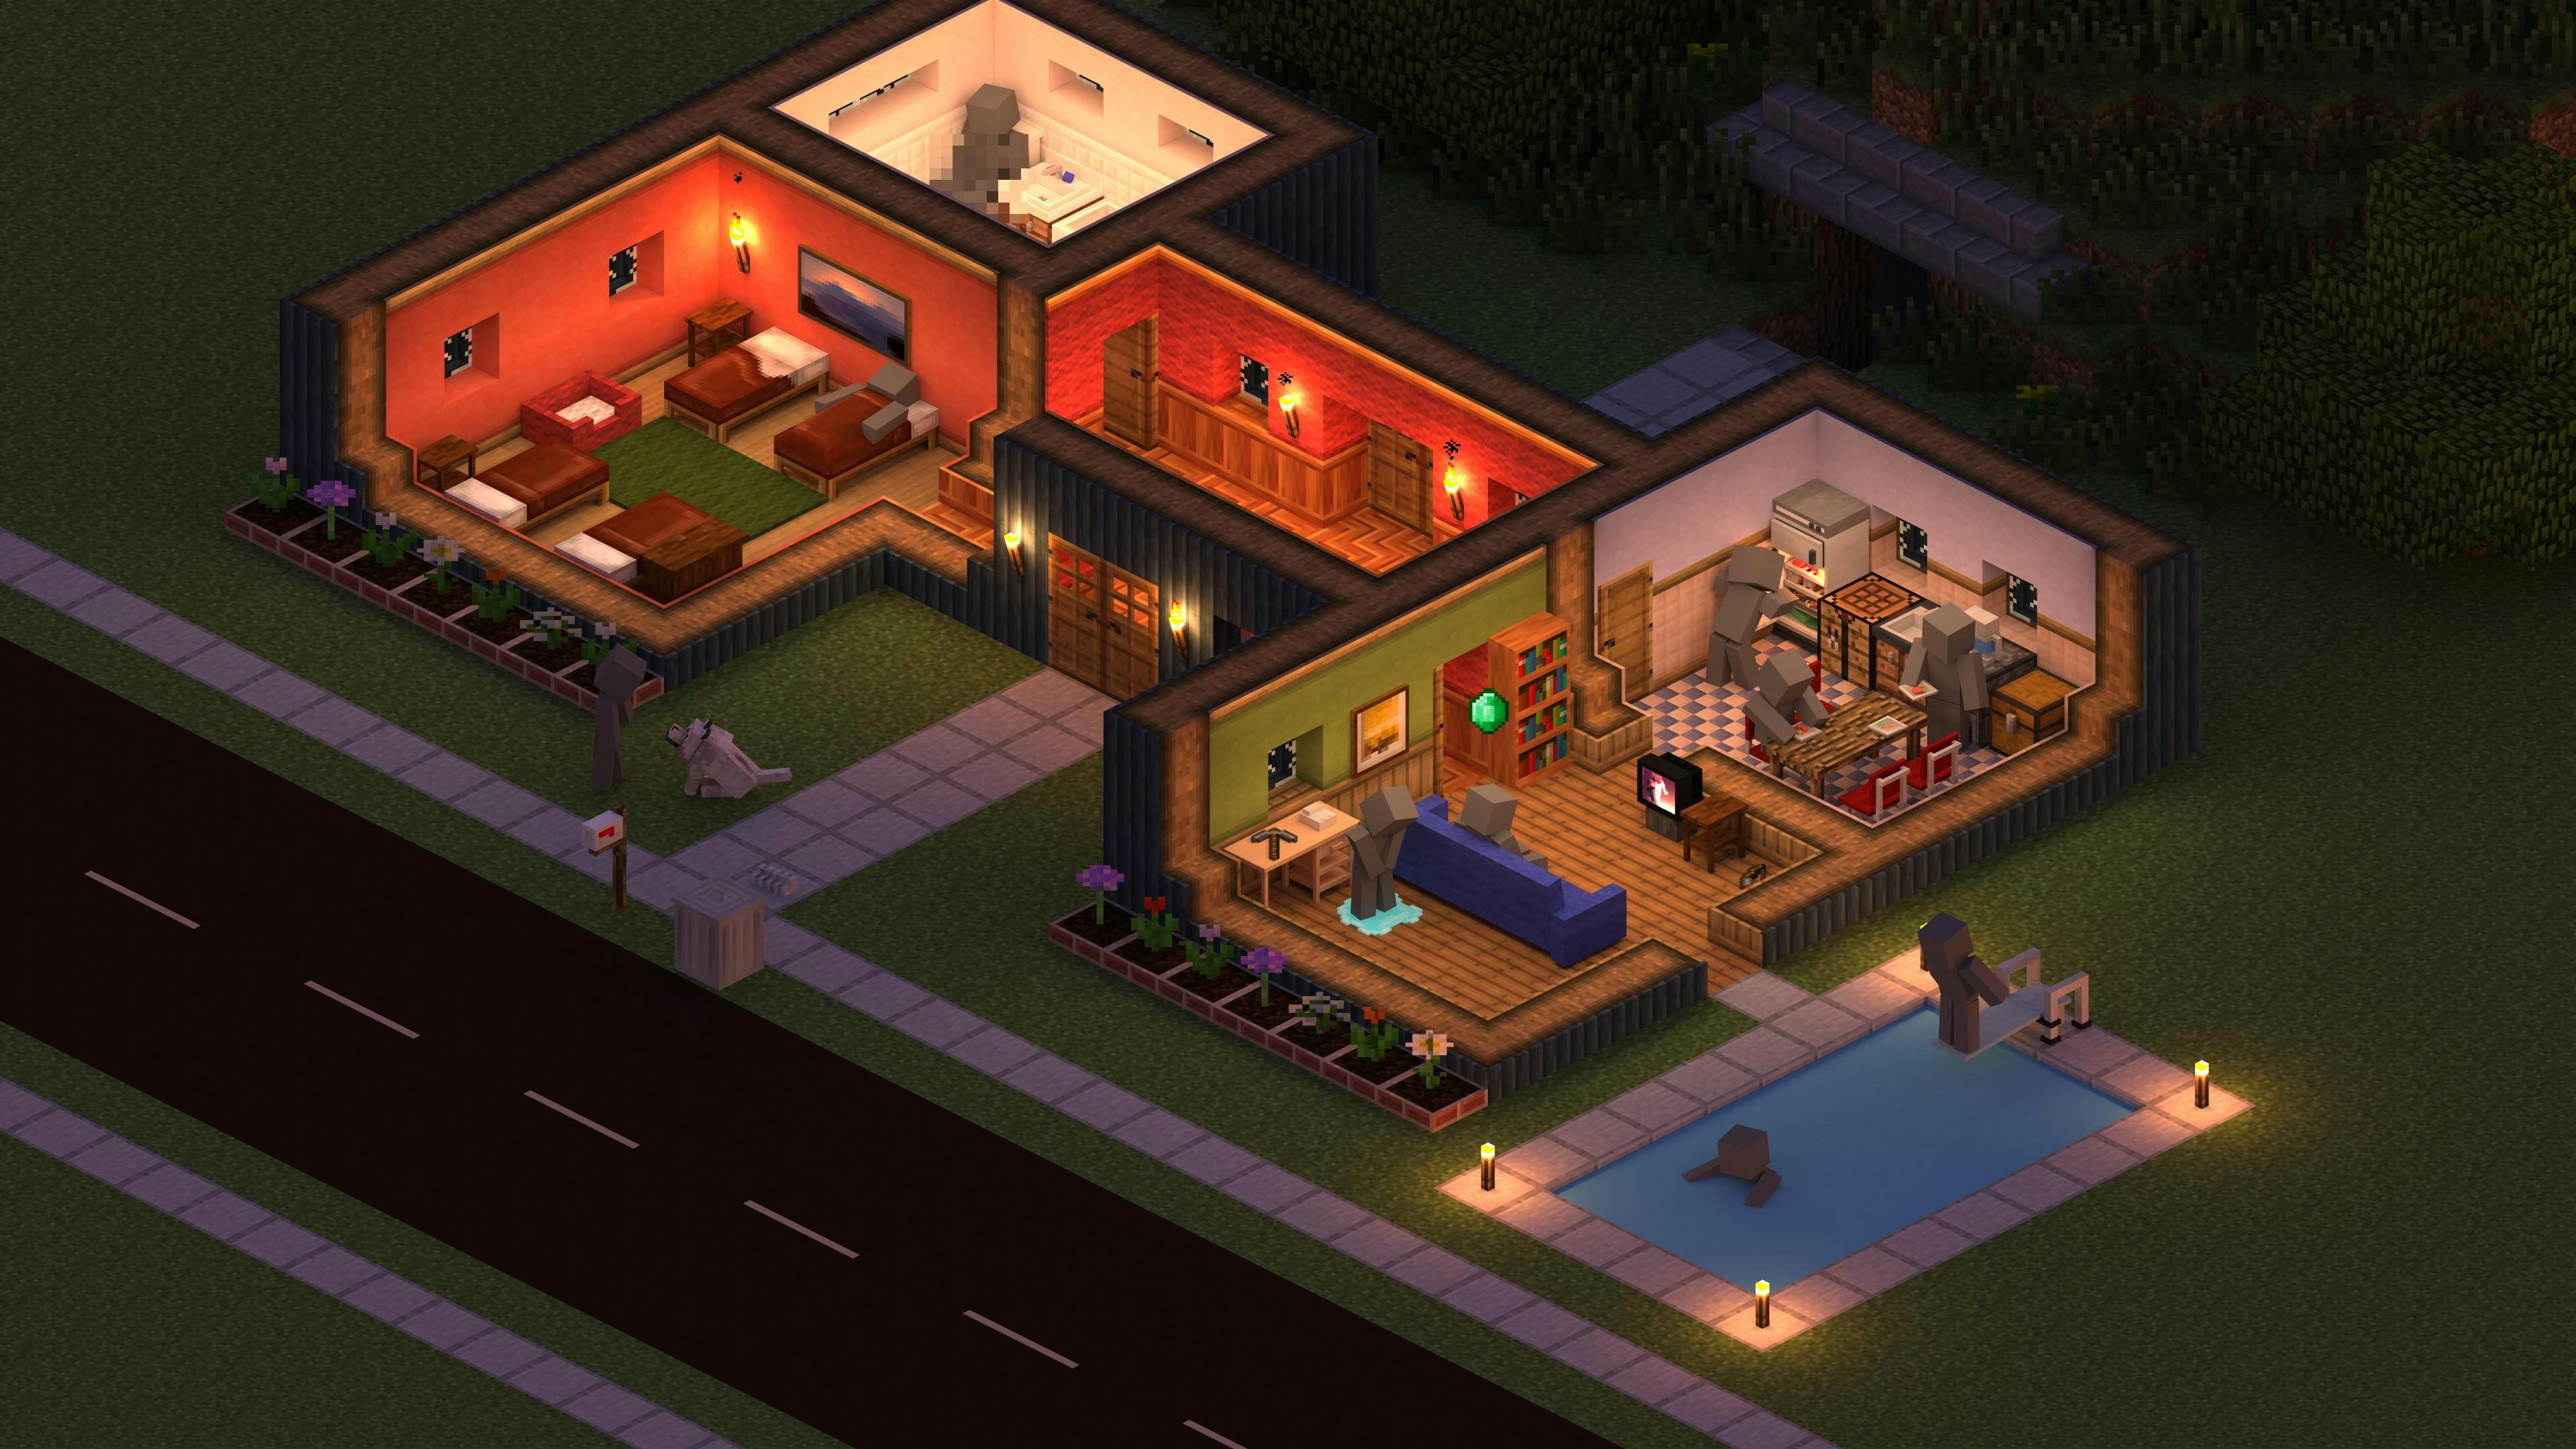 The Sims!